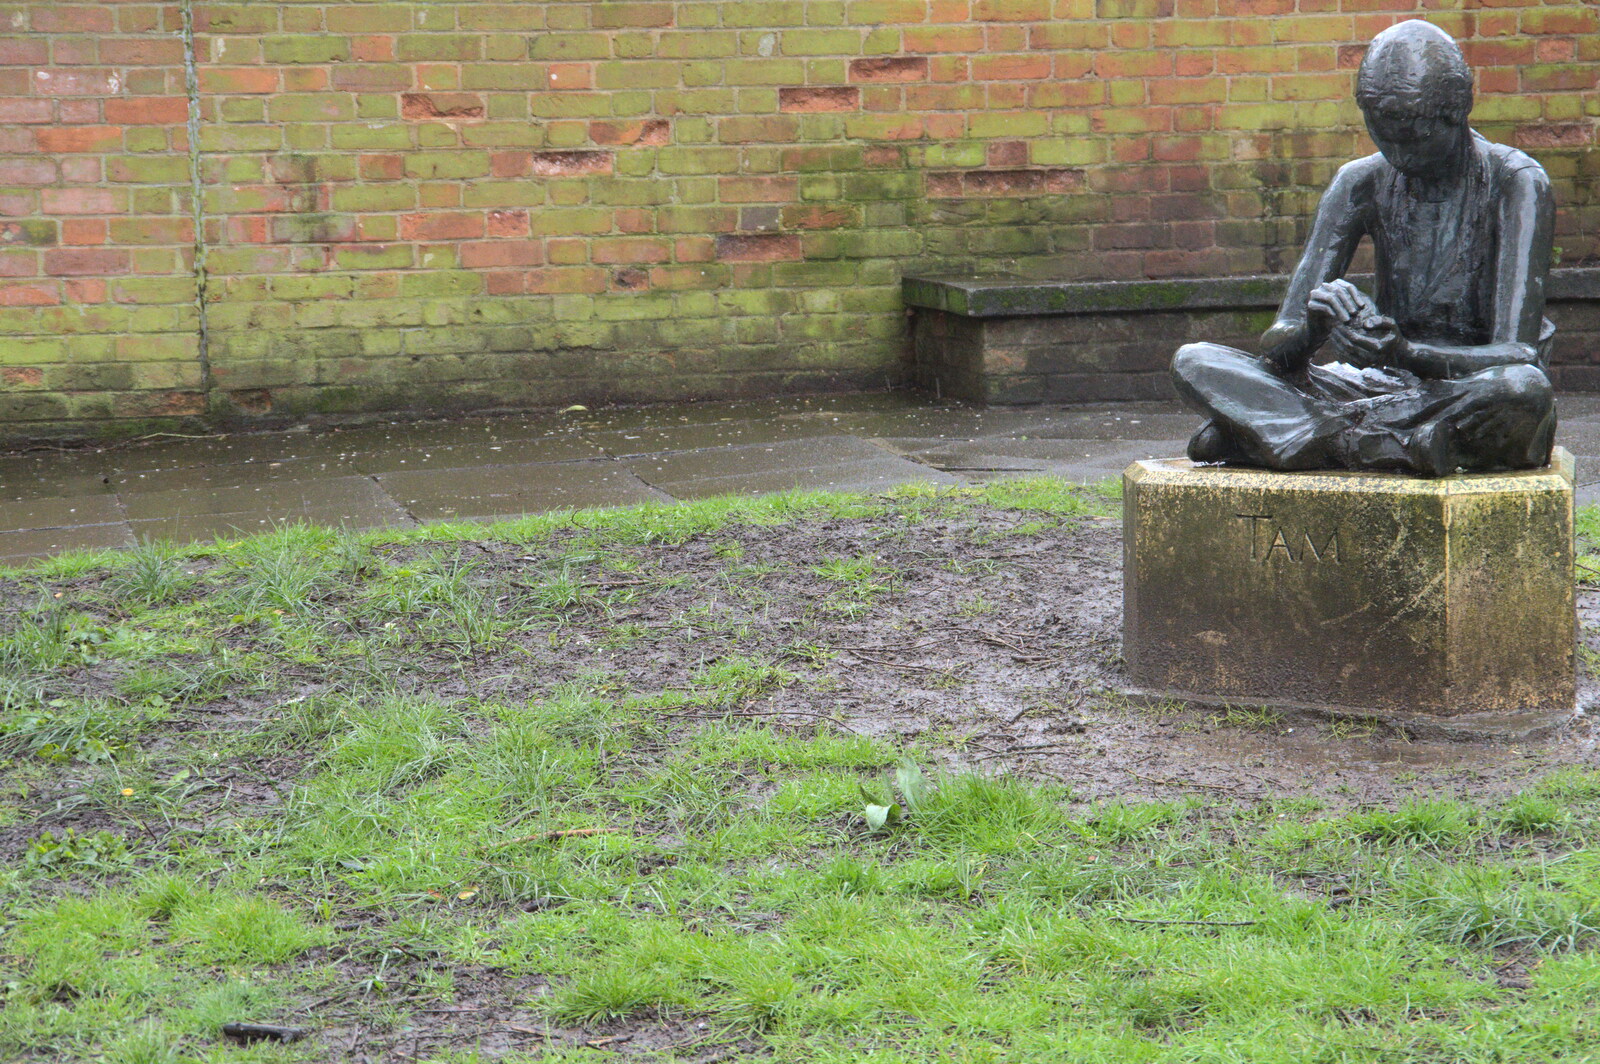 The statue of Tam is sad and alone in the mud from Fred's Flute Exam, Ipswich, Suffolk - 5th March 2020